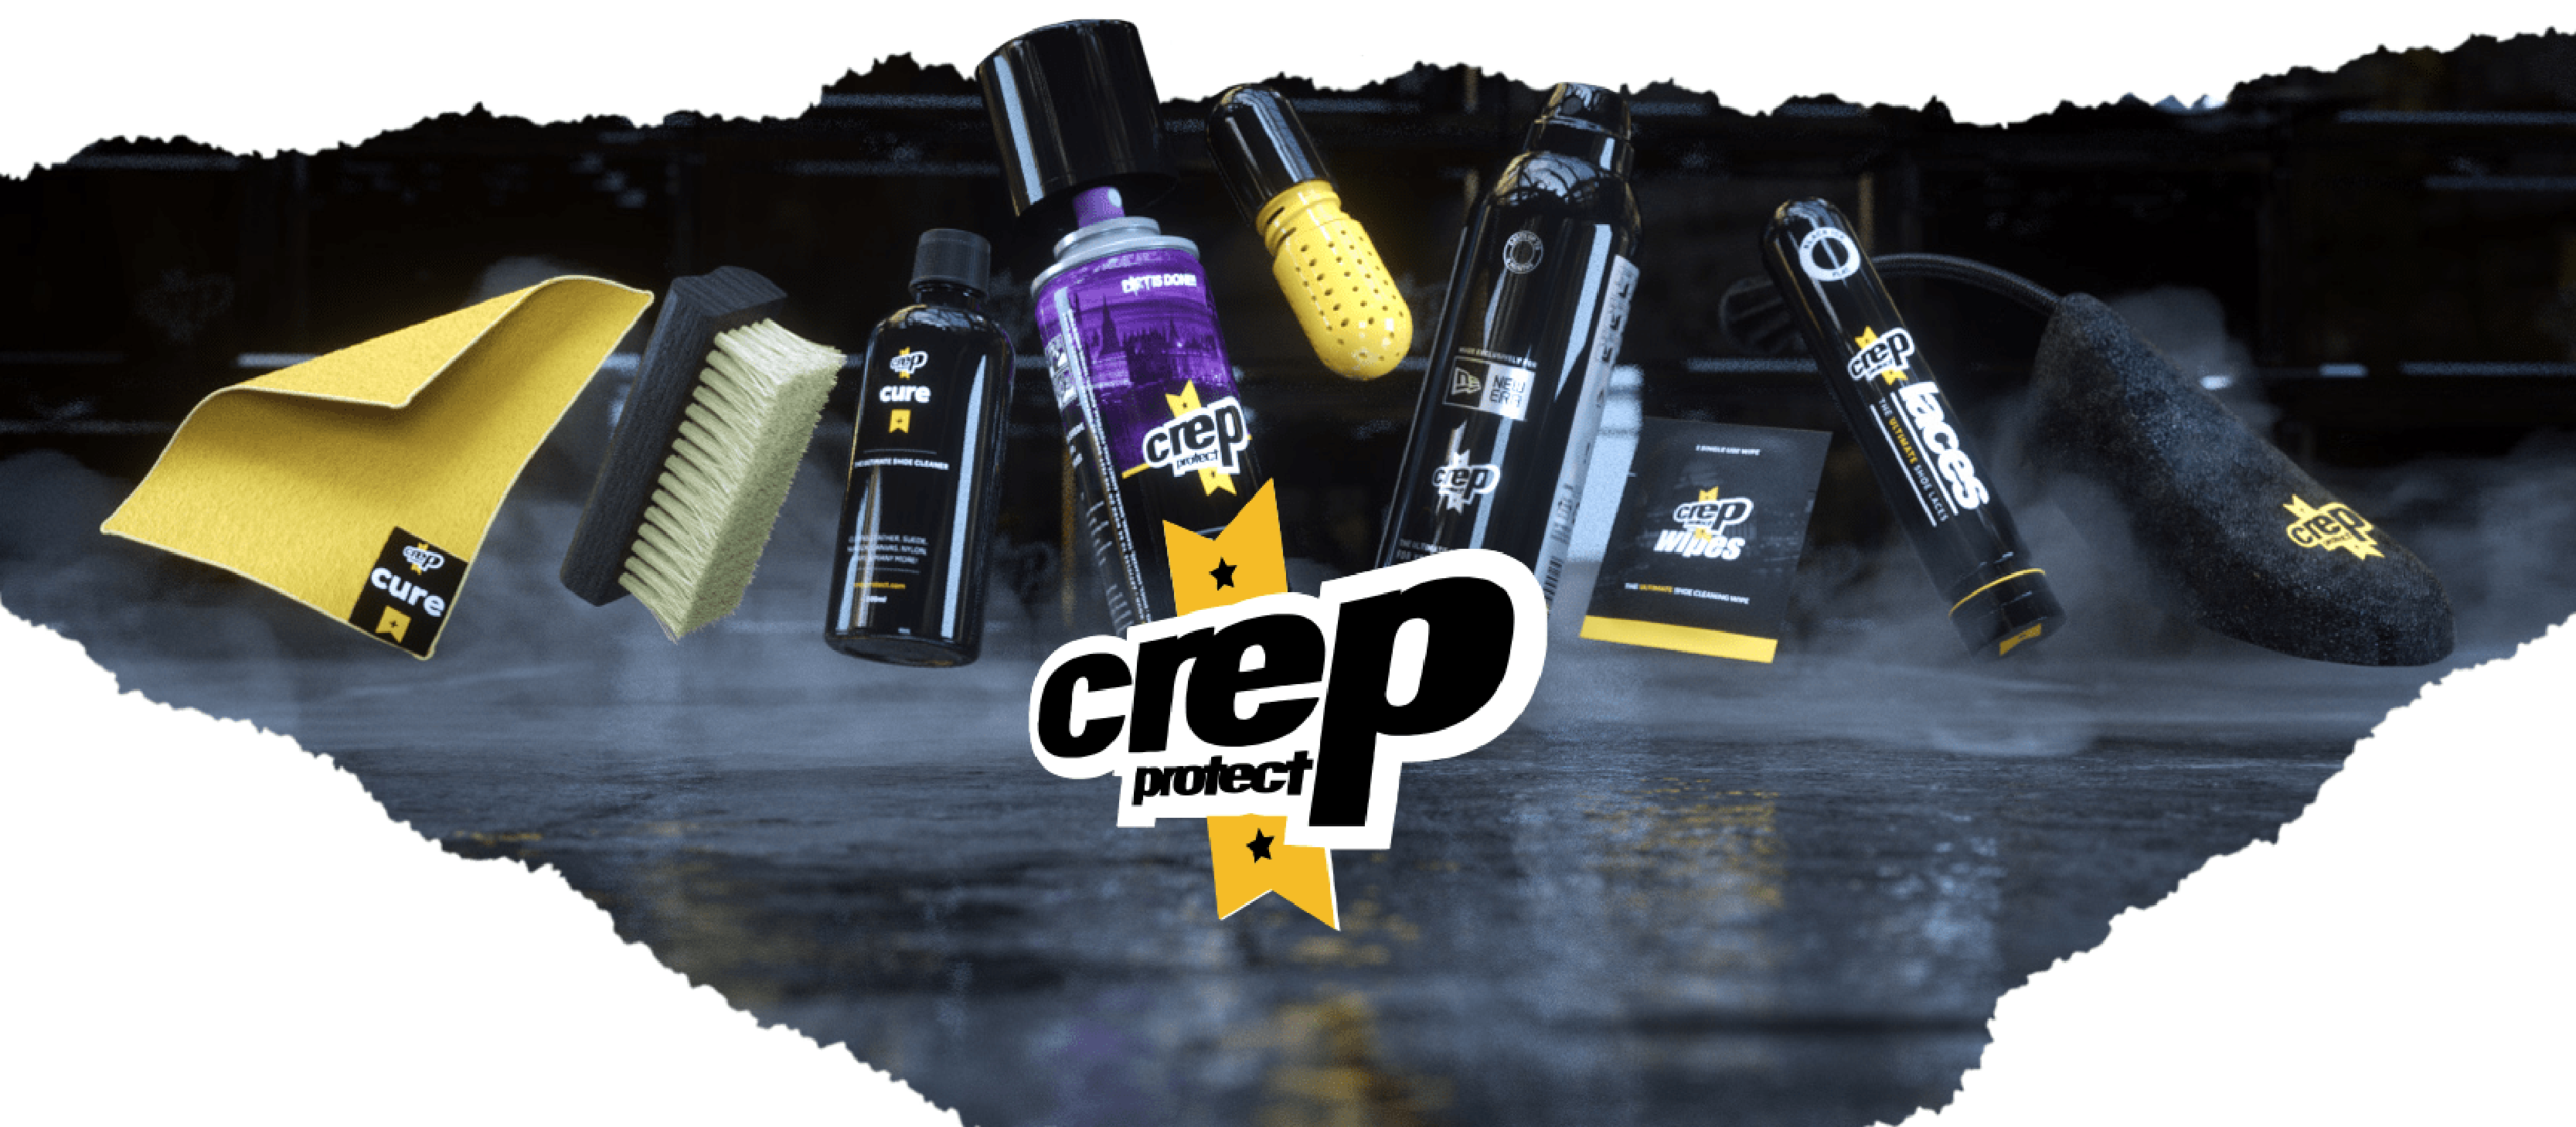 Everything you need to know about the Crep Protect Starter Pack